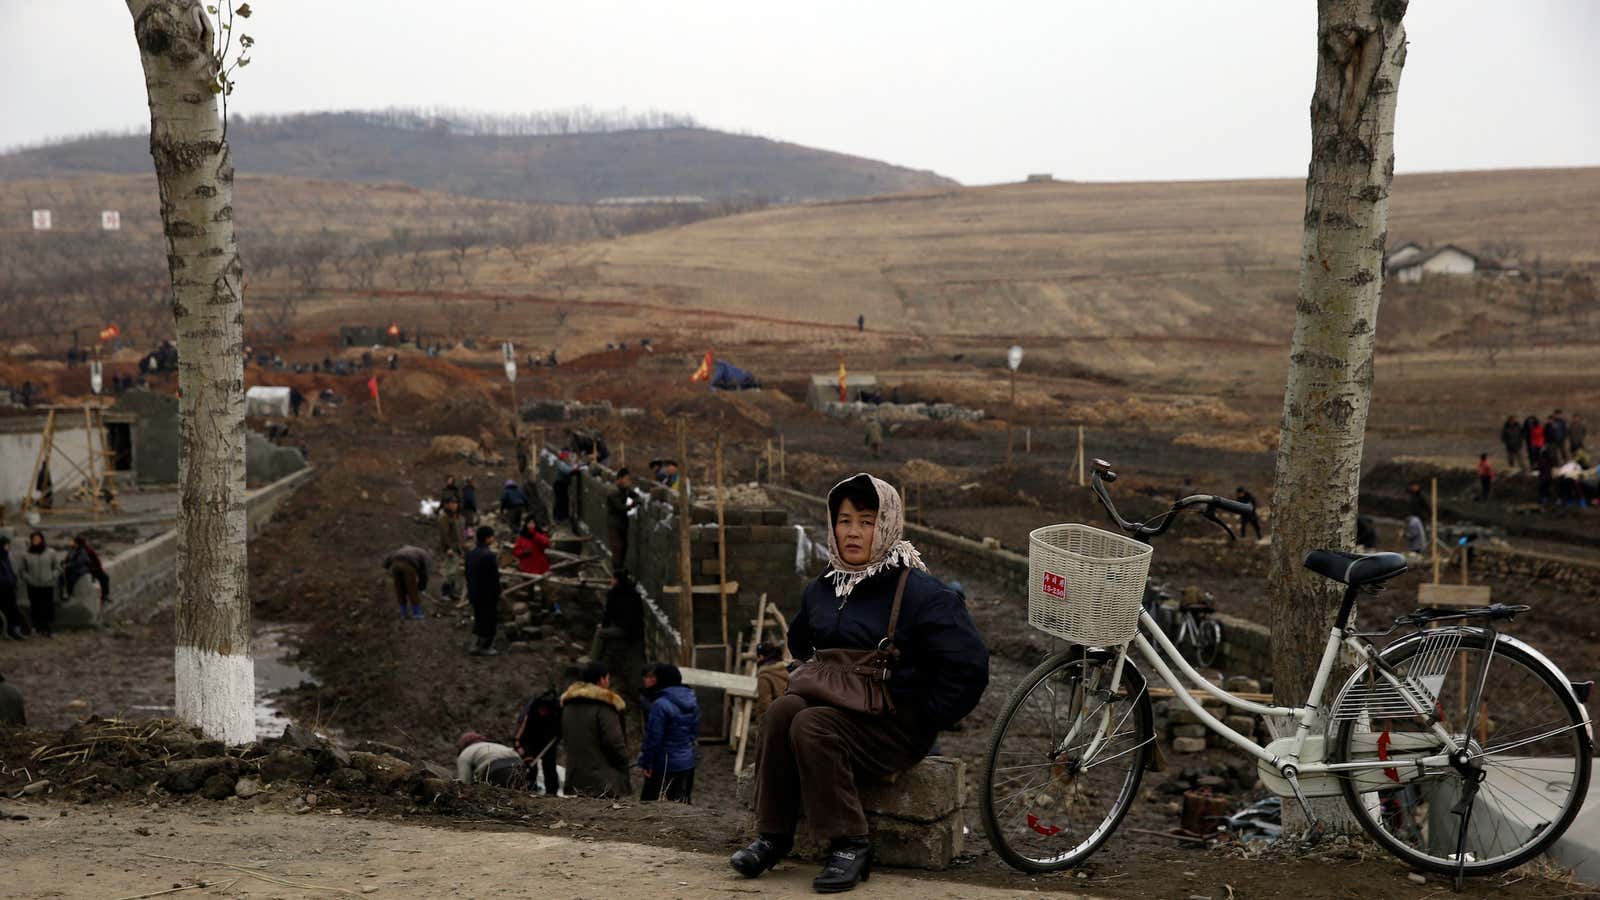 North Korean workers, whose state news agency says America’s “toiling masses” do not have homes or bread.